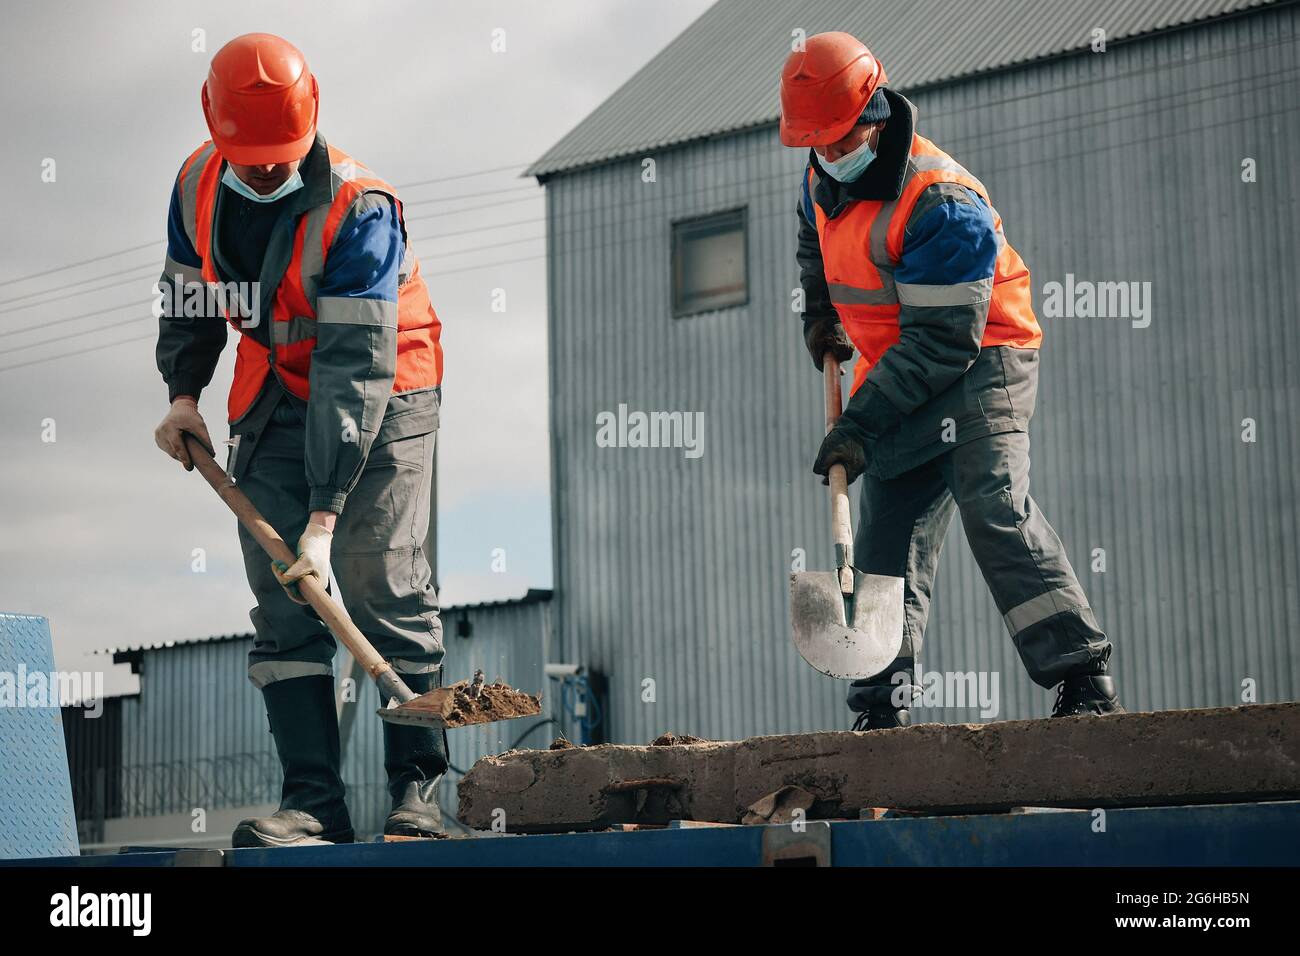 https://c8.alamy.com/comp/2G6HB5N/two-workers-in-hard-hats-work-clothes-and-a-medical-mask-work-with-shovels-at-a-construction-site-hard-physical-labor-an-authentic-scene-at-work-2G6HB5N.jpg